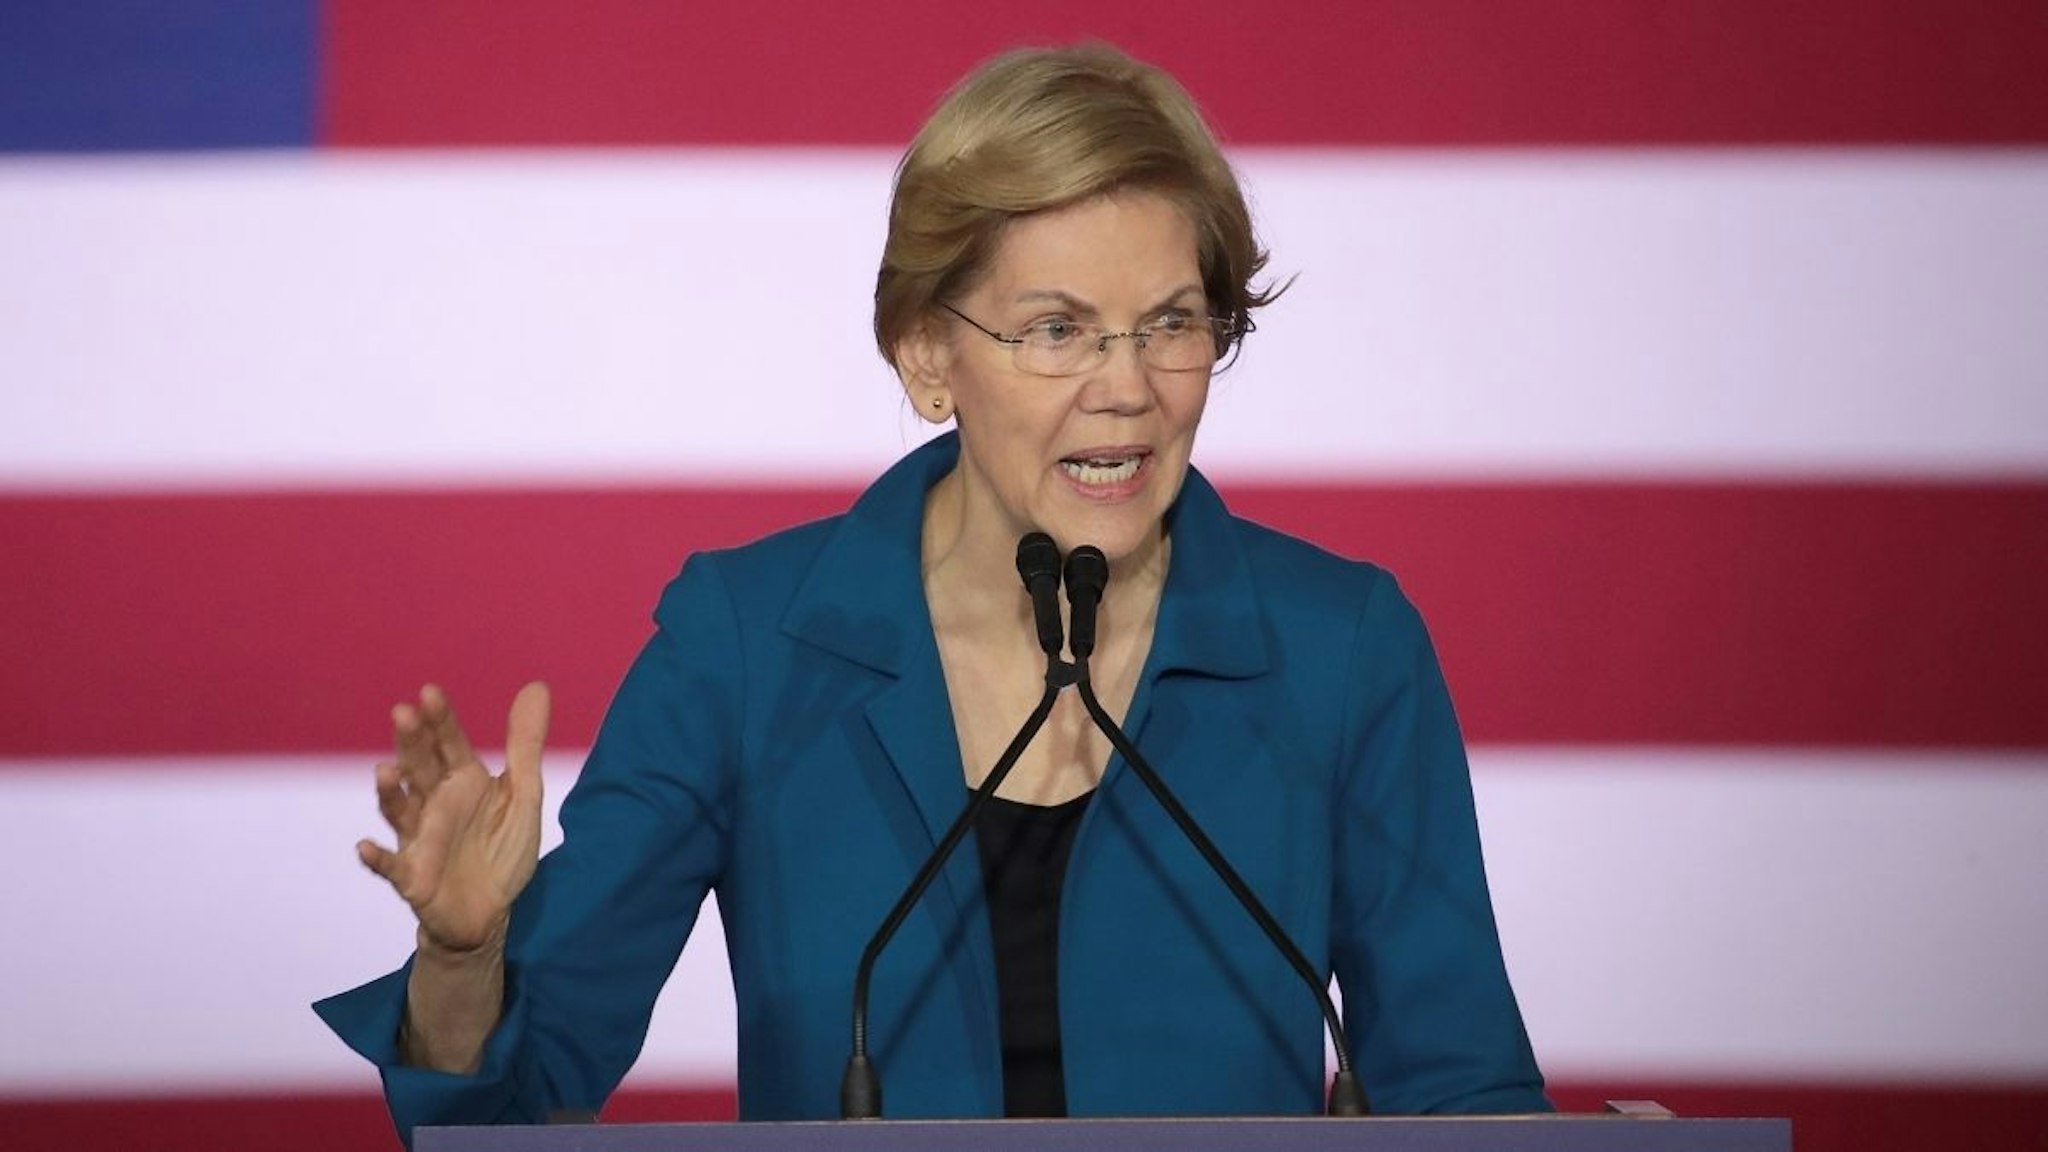 Democratic presidential candidate Sen. Elizabeth Warren (D-MA) speaks at her primary night event on February 11, 2020 in Manchester, New Hampshire.